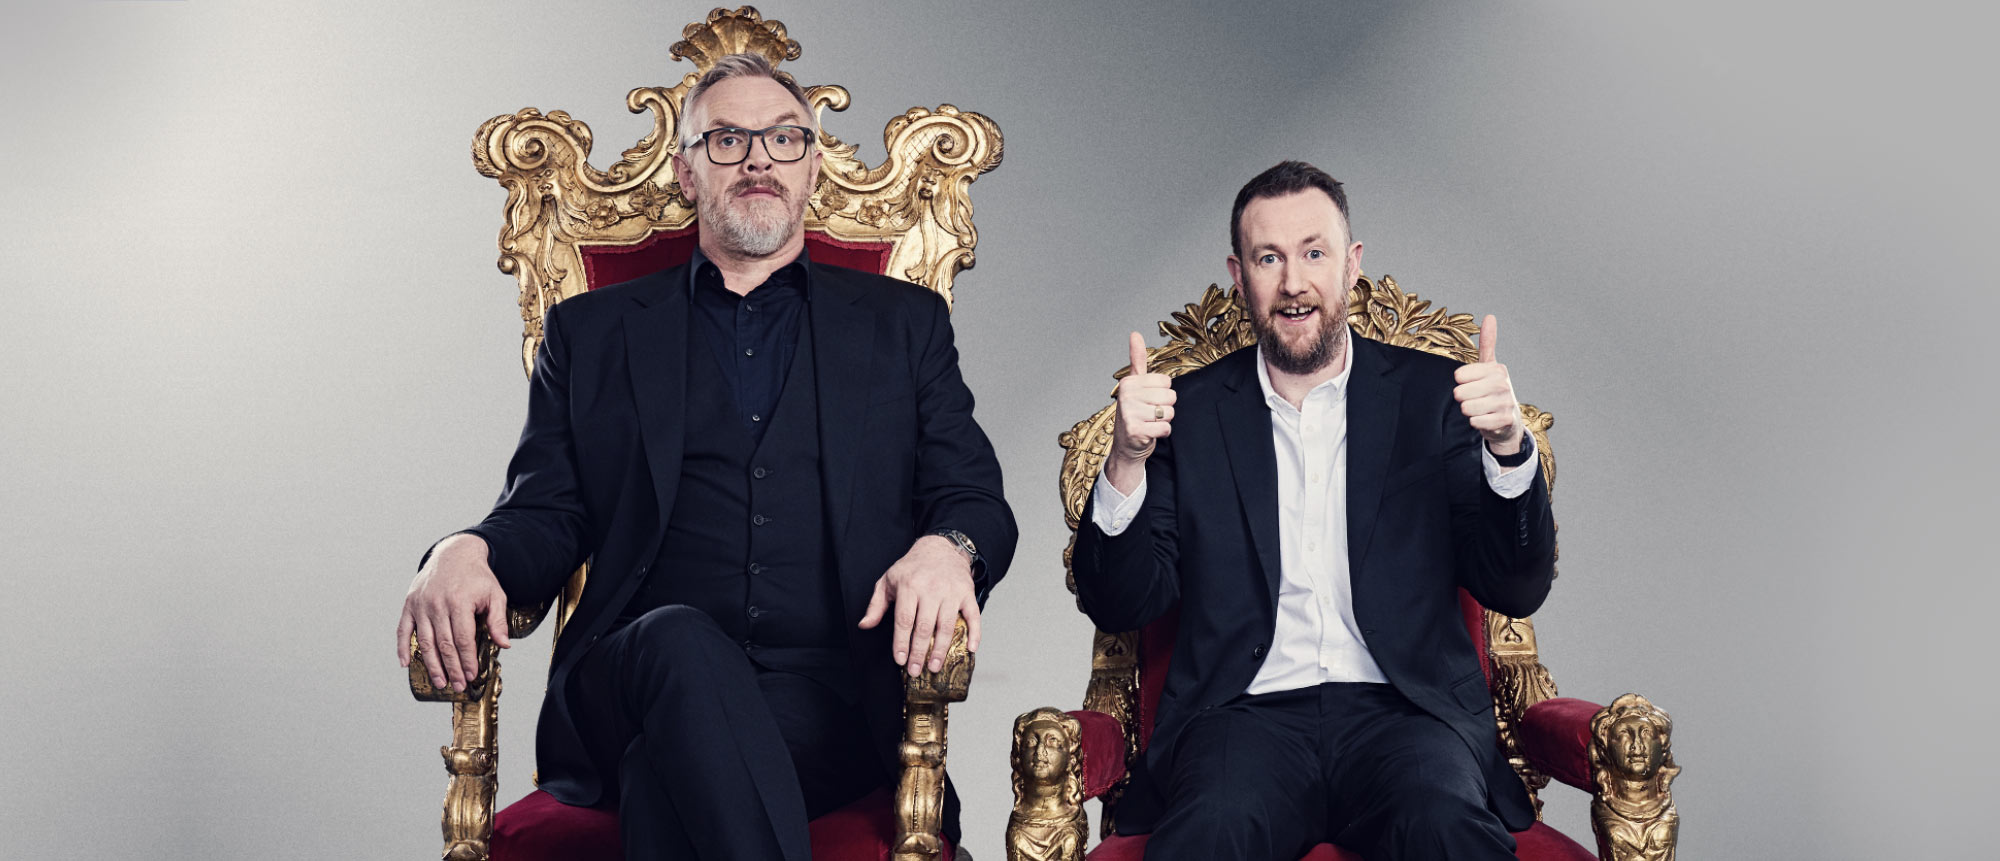 Radiox:Win a 43” Sony Bravia Smart Full HD TV with HDR, a Sony Sound Bar with Subwoofer, Nintendo Switch console and a signed copy of the new Taskmaster book: 200 Extraordinary Tasks for Ordinary People.